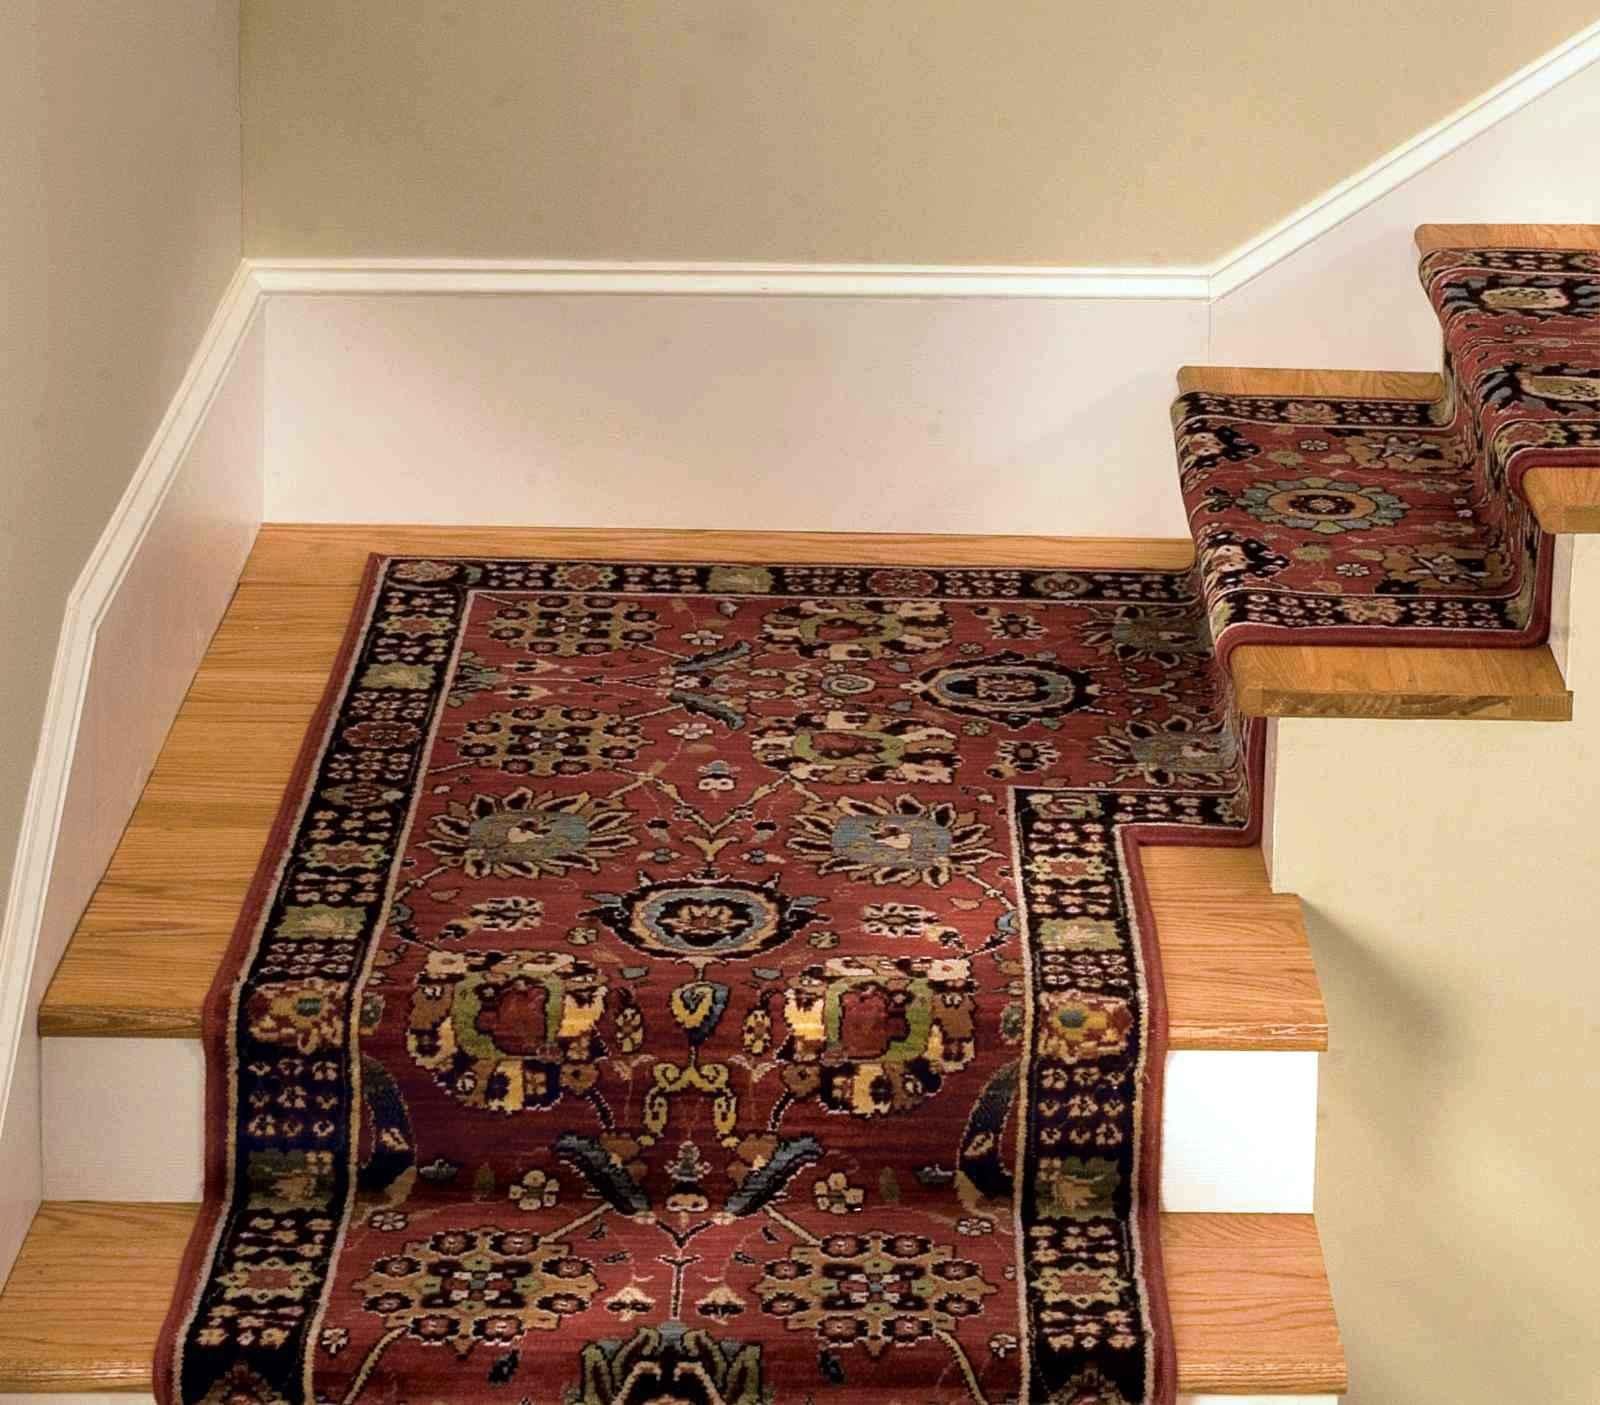 Project Ideas Runner Rugs The Foot Interesting Stair Hallway With Regard To Hallway Runner Rugs By The Foot (View 16 of 20)